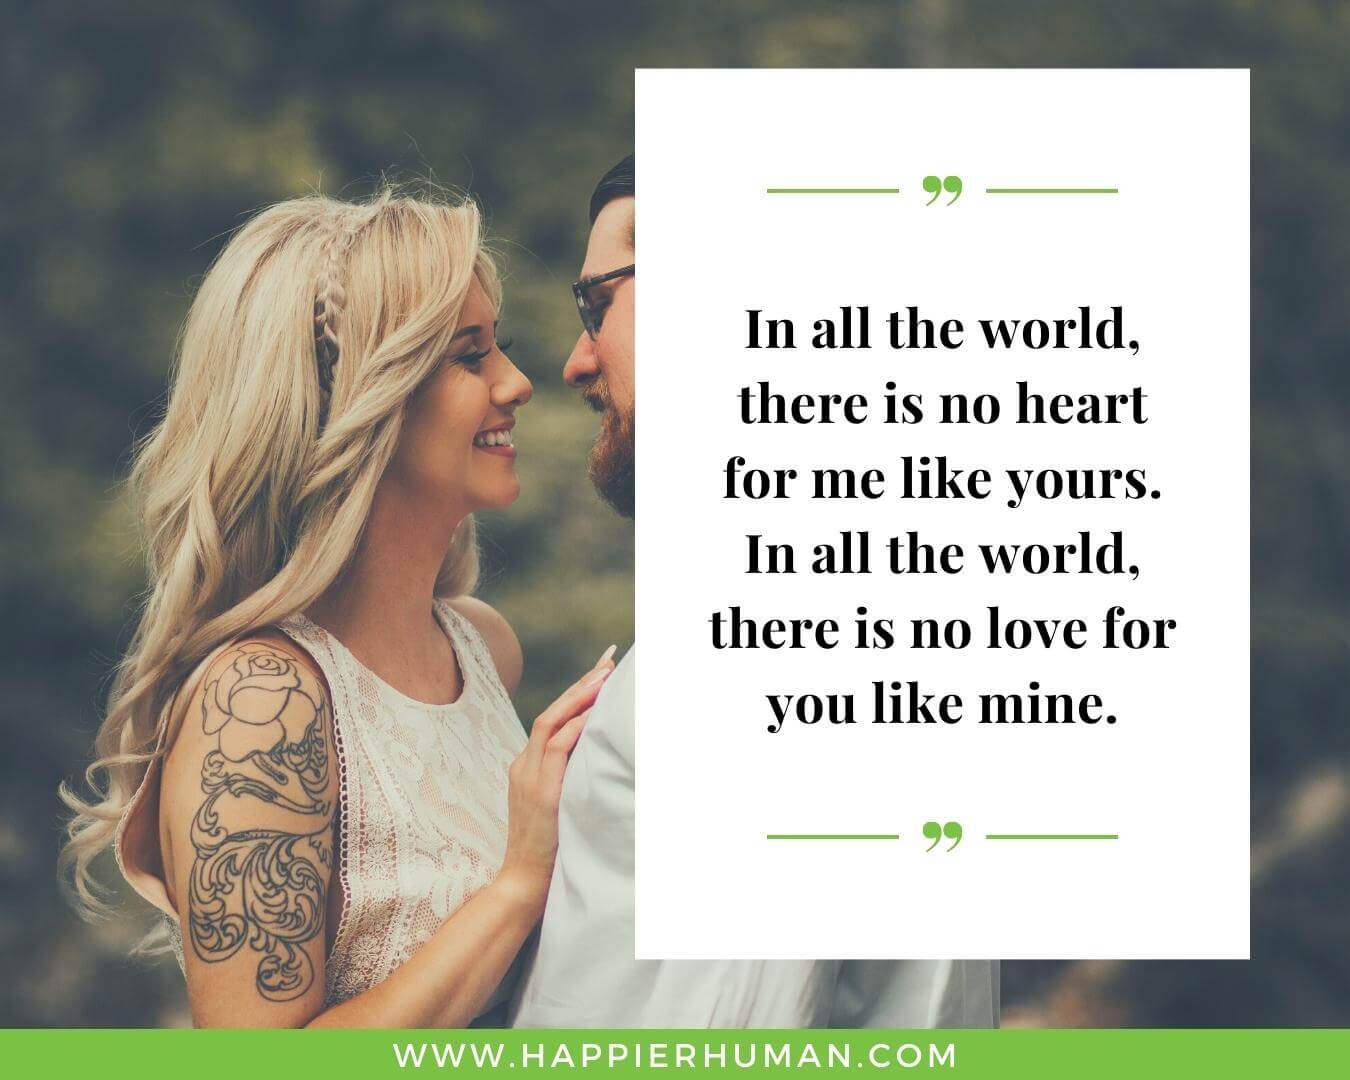 Unconditional Love Quotes for Her - “In all the world, there is no heart for me like yours. In all the world, there is no love for you like mine.”